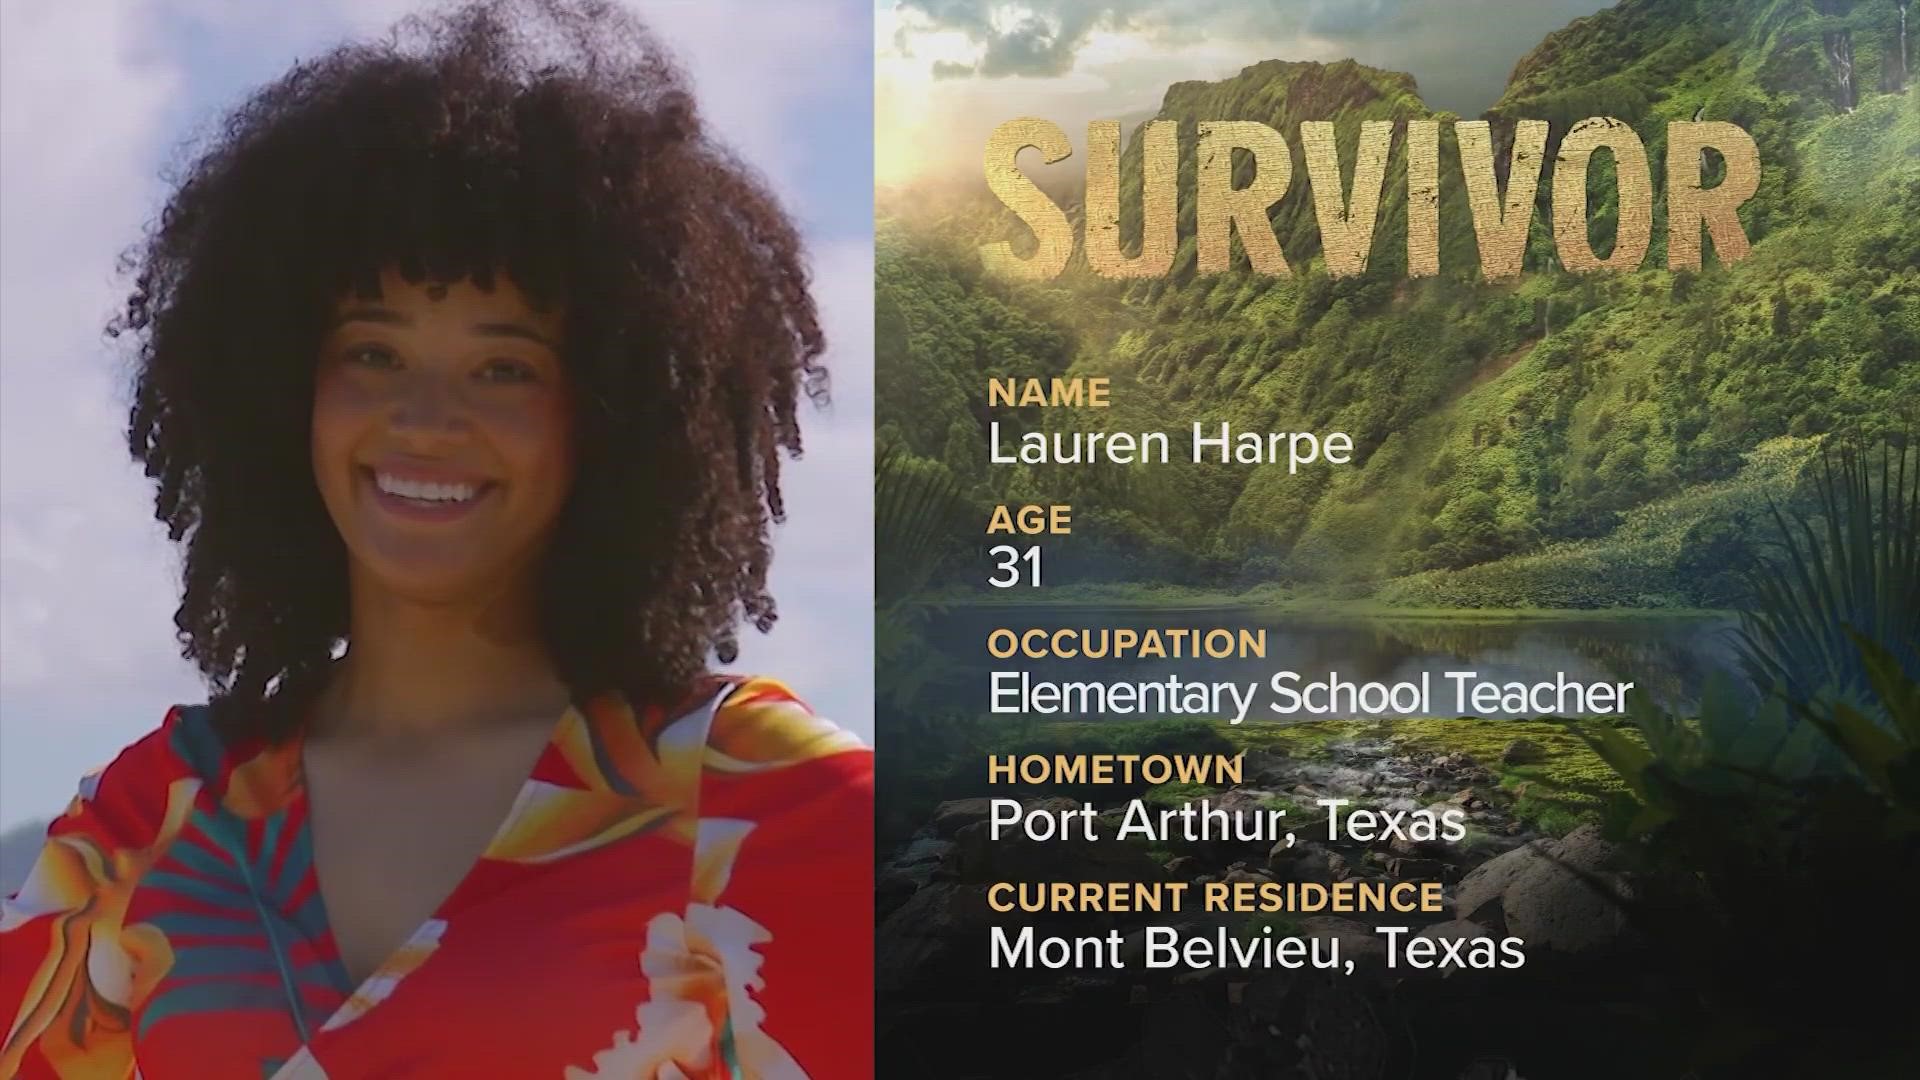 Lauren Harpe, 31, will be competing in the 2023 season of 'Survivor.' She is from Port Arthur, Texas but currently resides in Mont Belvieu, Texas.